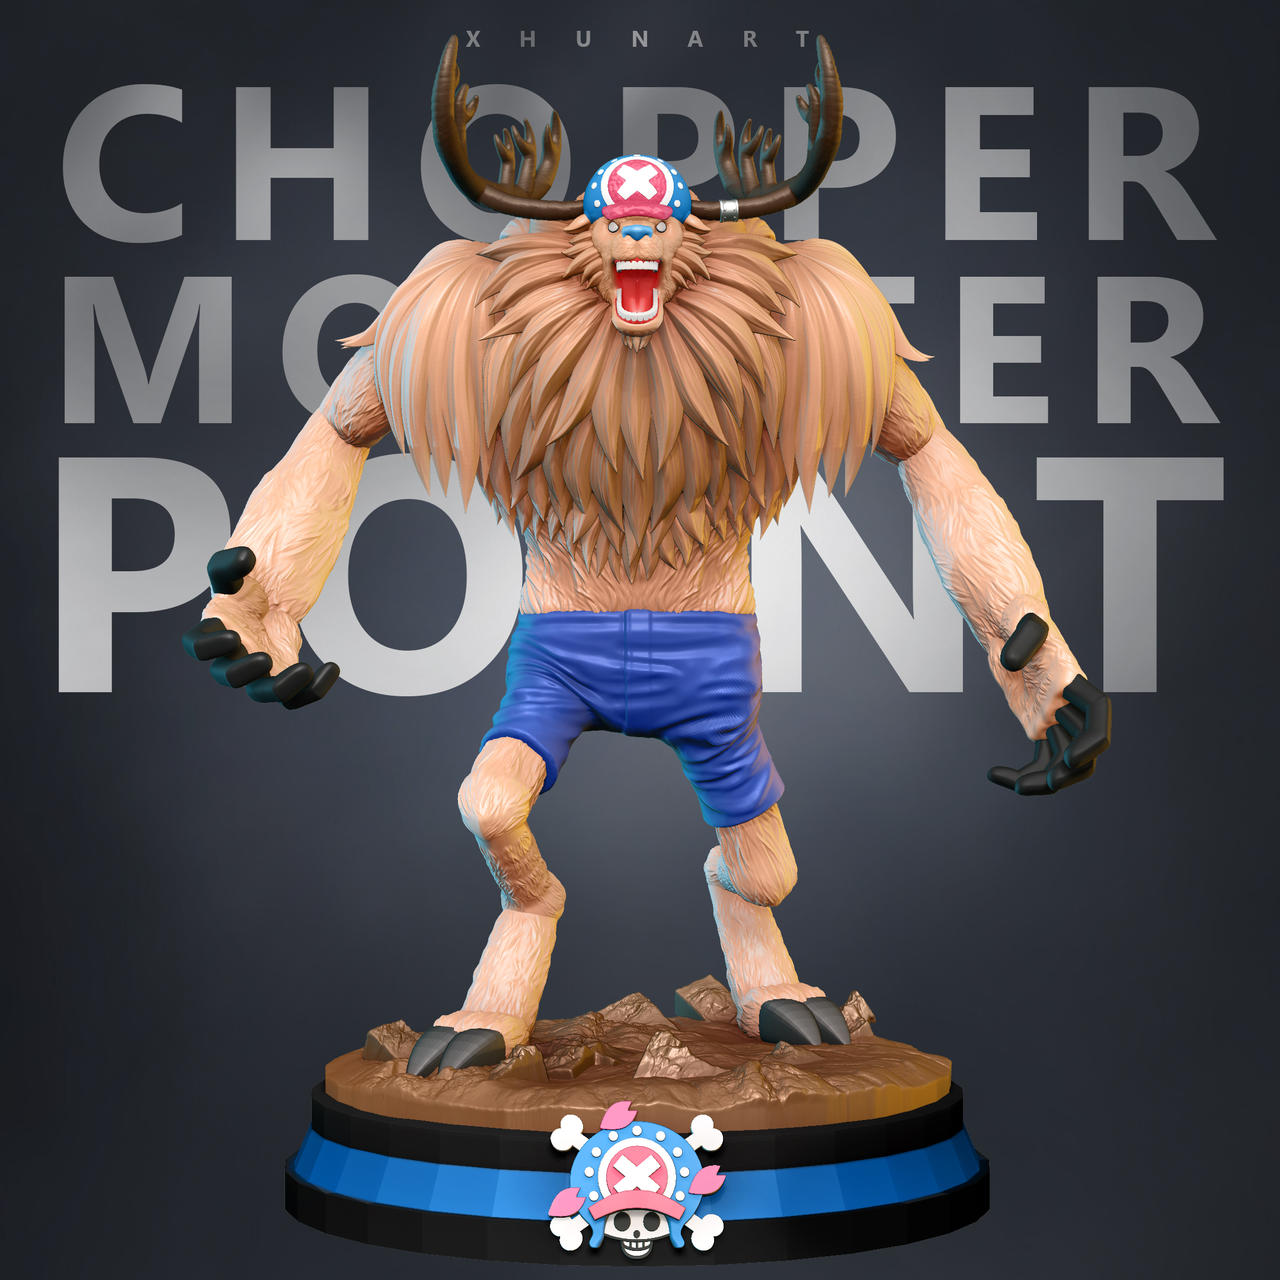 XhunArt - Here's our Chopper monster point statue work in